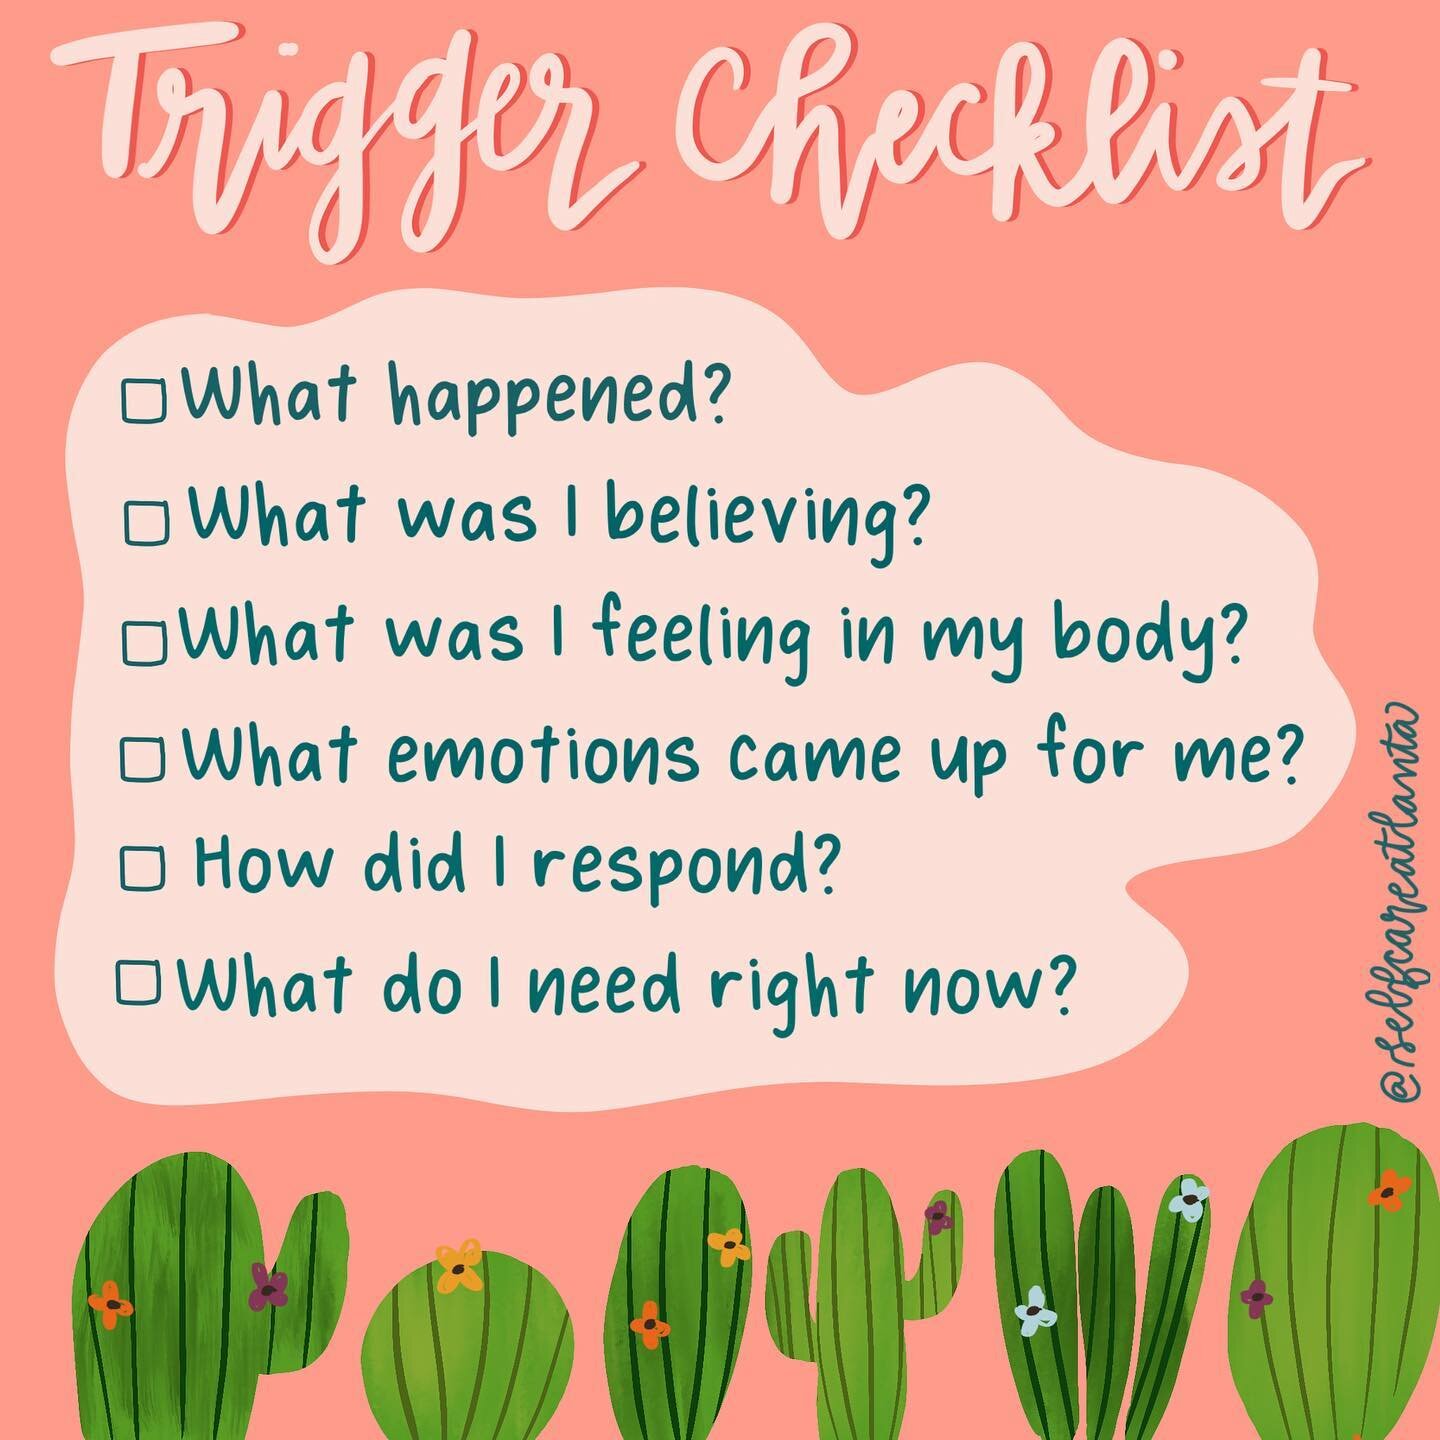 I know I&rsquo;m not alone in experiencing moments of feeling...triggered. 

Have you ever been in a situation or around people and when you walk away, you just feel... off? 

Maybe in that moment all you know is that you&rsquo;re bothered or feel so